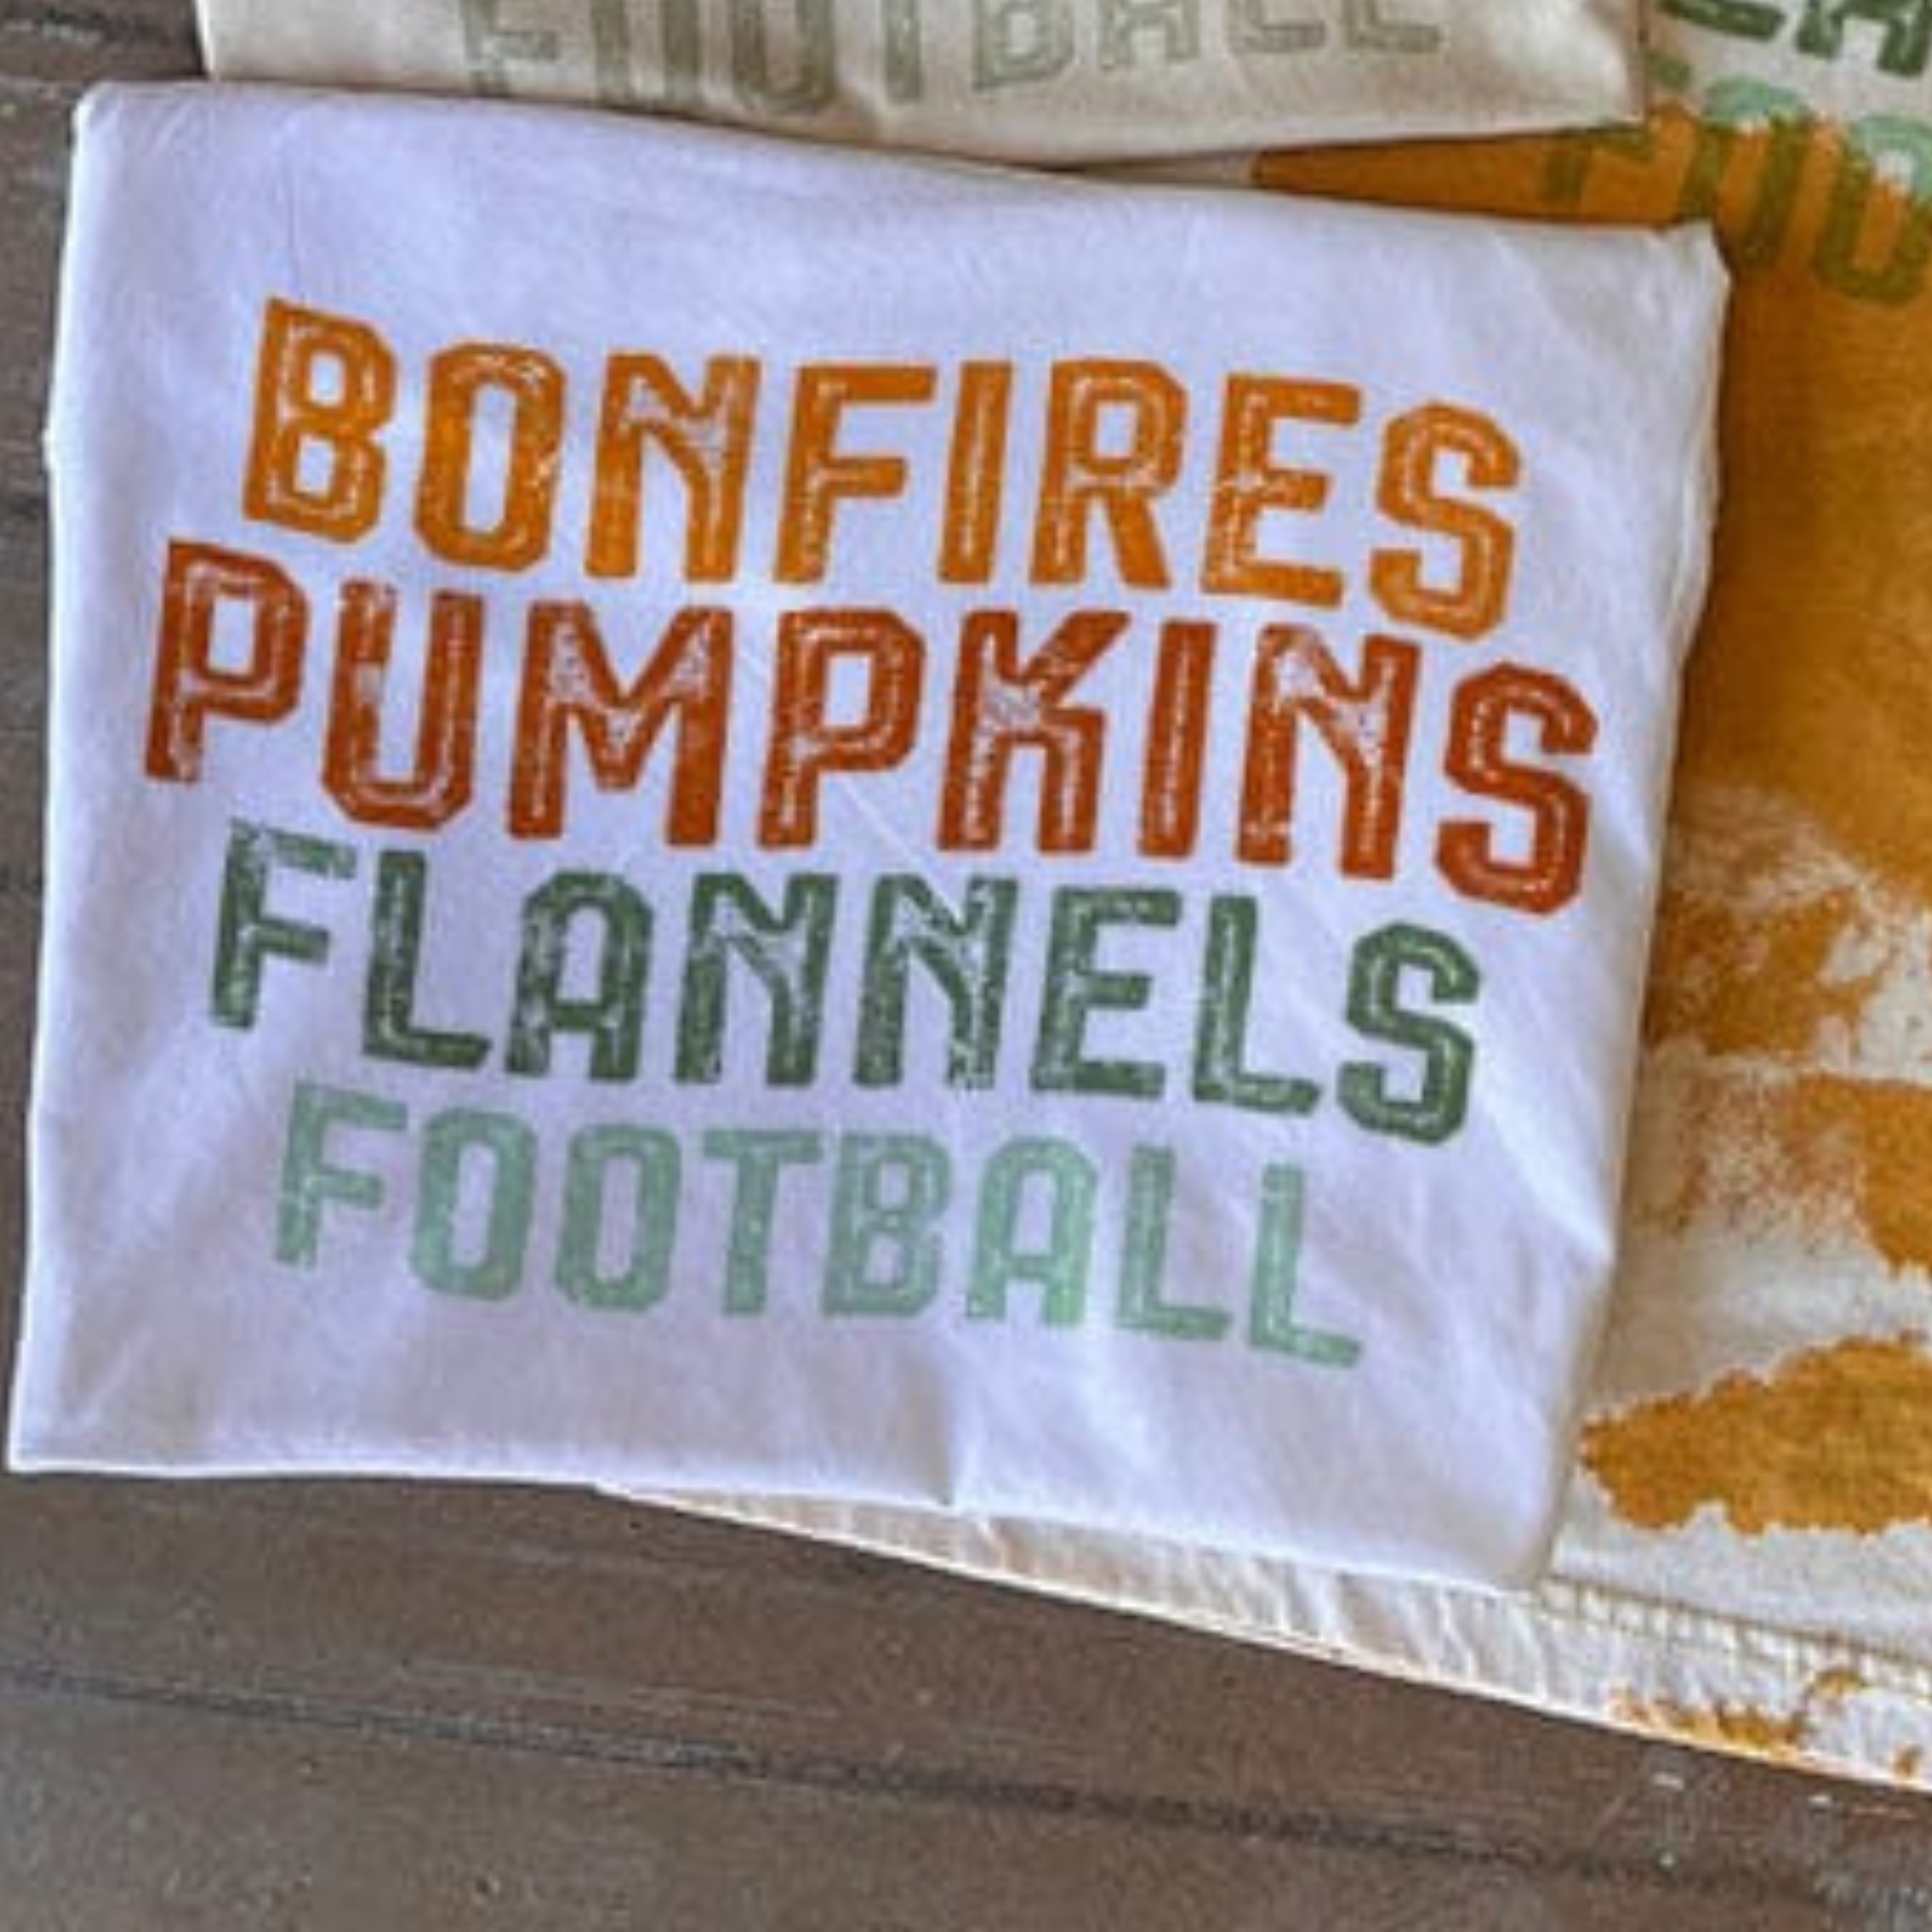 This white tee includes a crew neckline, short sleeves, and a graphic with words "Bonfires Pumpkins Flannels Football". This is a Bella + Canvas Tee. It is shown in this photo as a folded flat lay. 